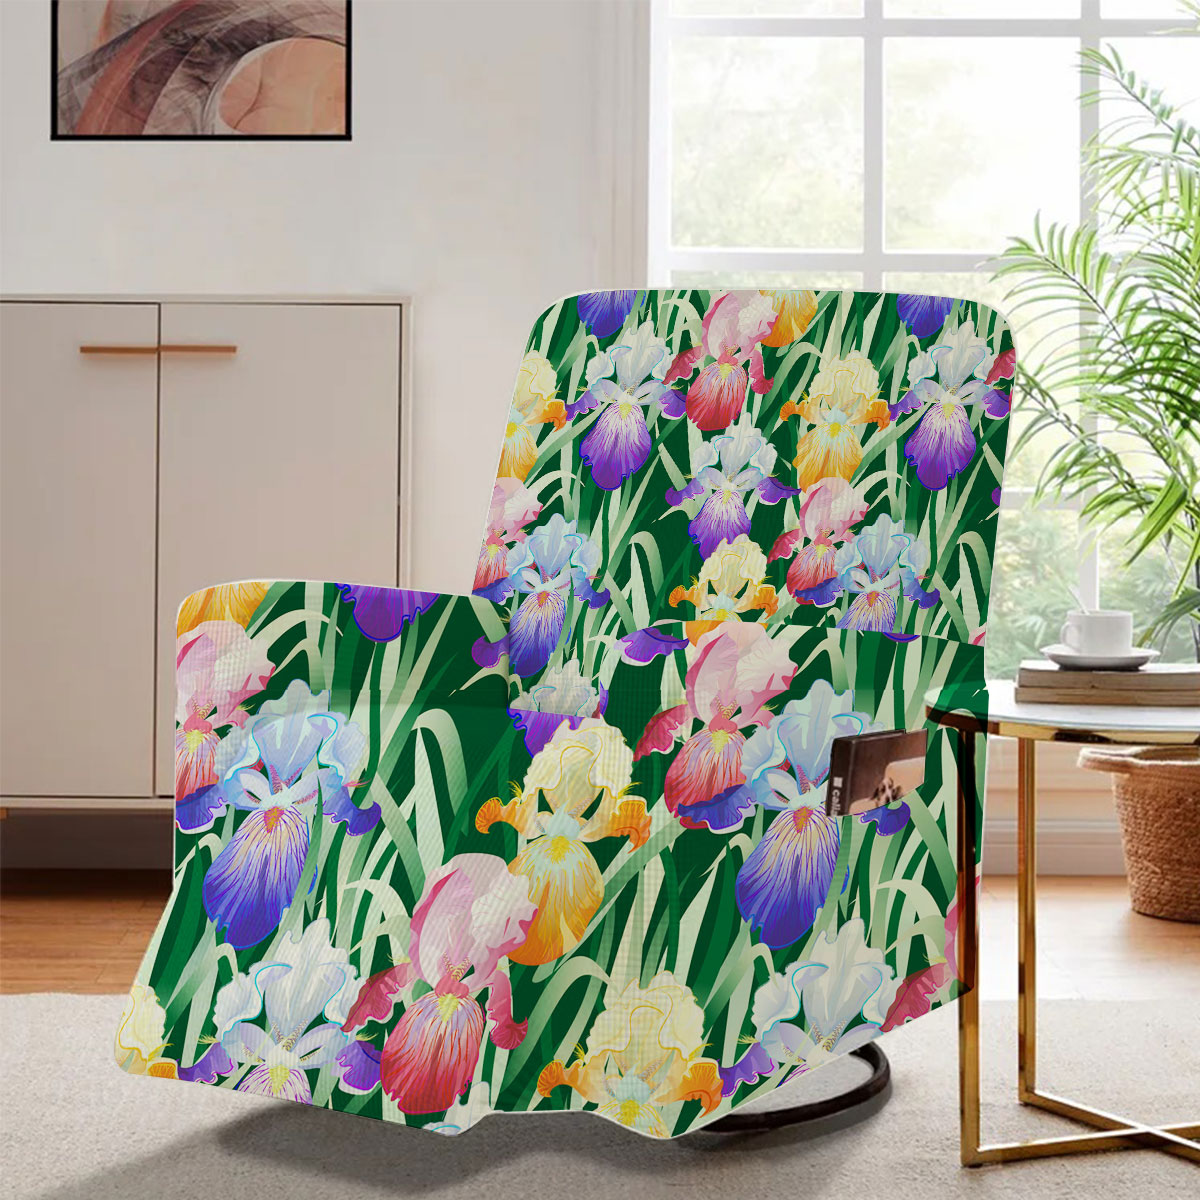 Colorful Iris Flowers And Green Leaves Recliner Slipcover